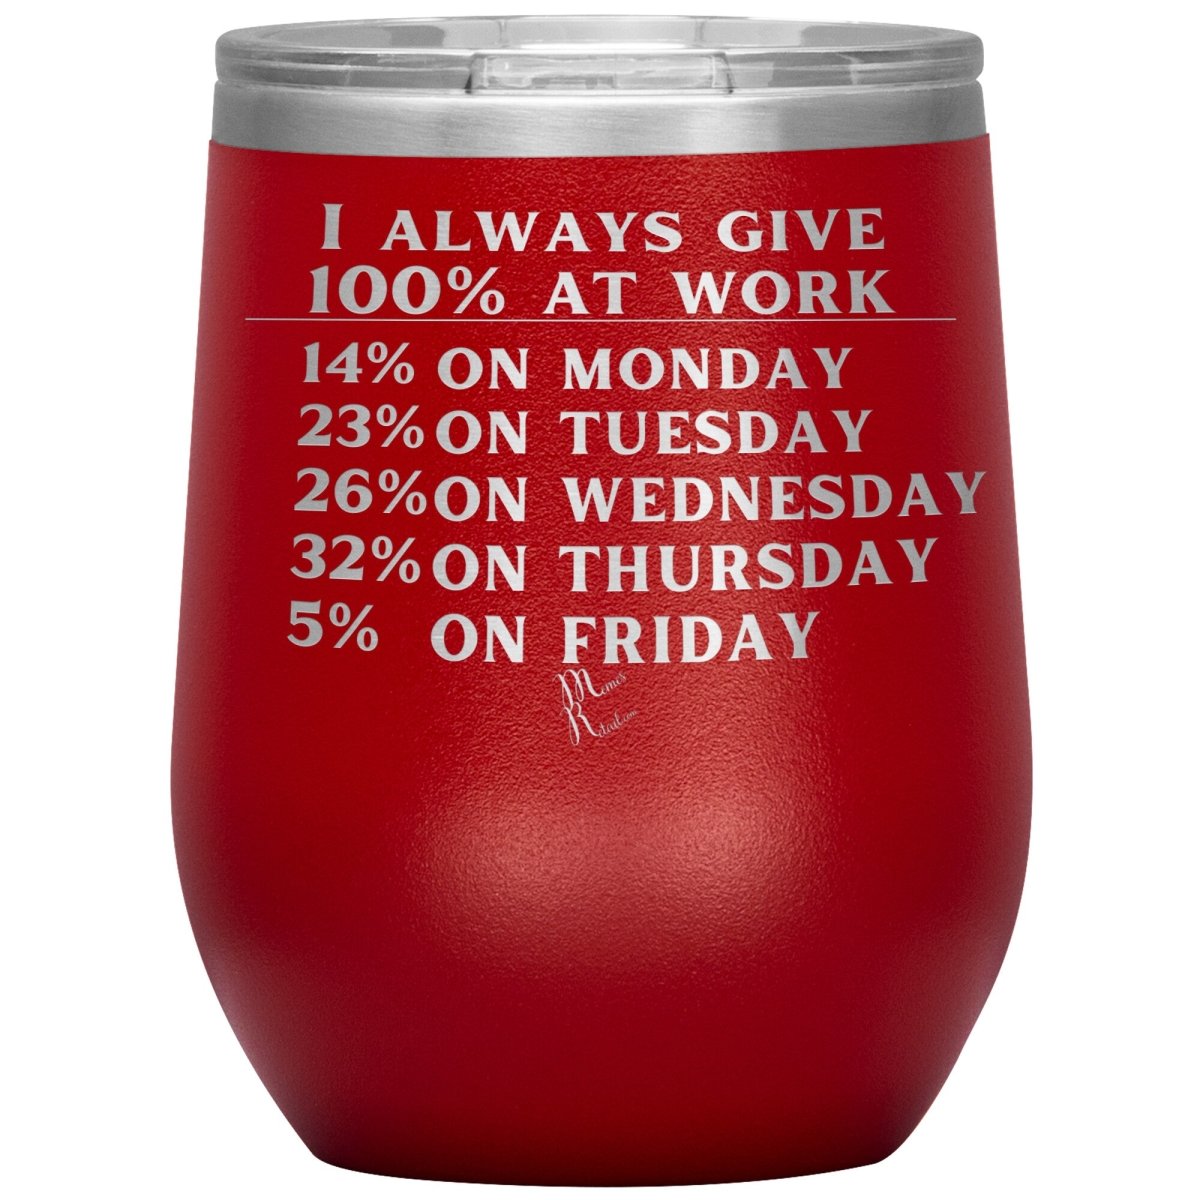 I Always Give 100% At Work Tumblers, 12oz Wine Insulated Tumbler / Red - MemesRetail.com